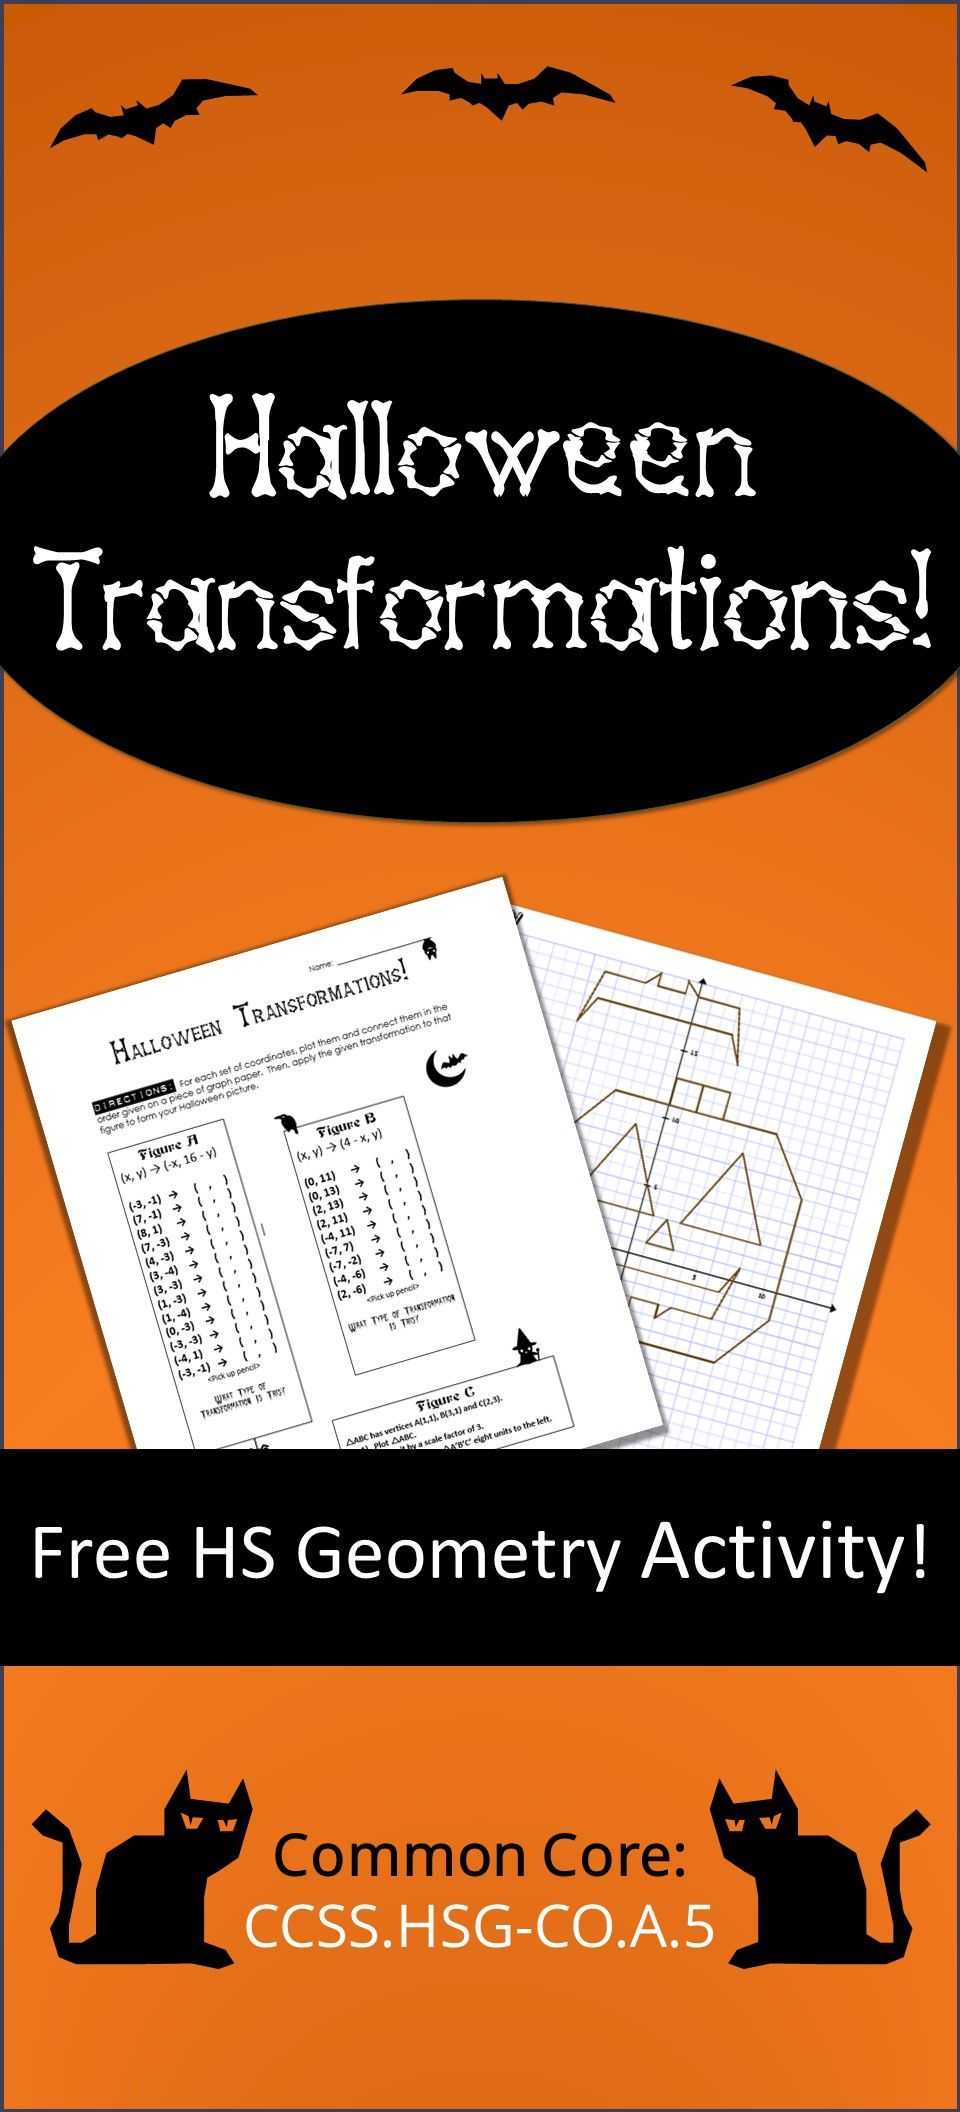 Transformations Of Linear Functions Worksheet as Well as Halloween Transformations Hs Geometry Activity – Aligned to Mon